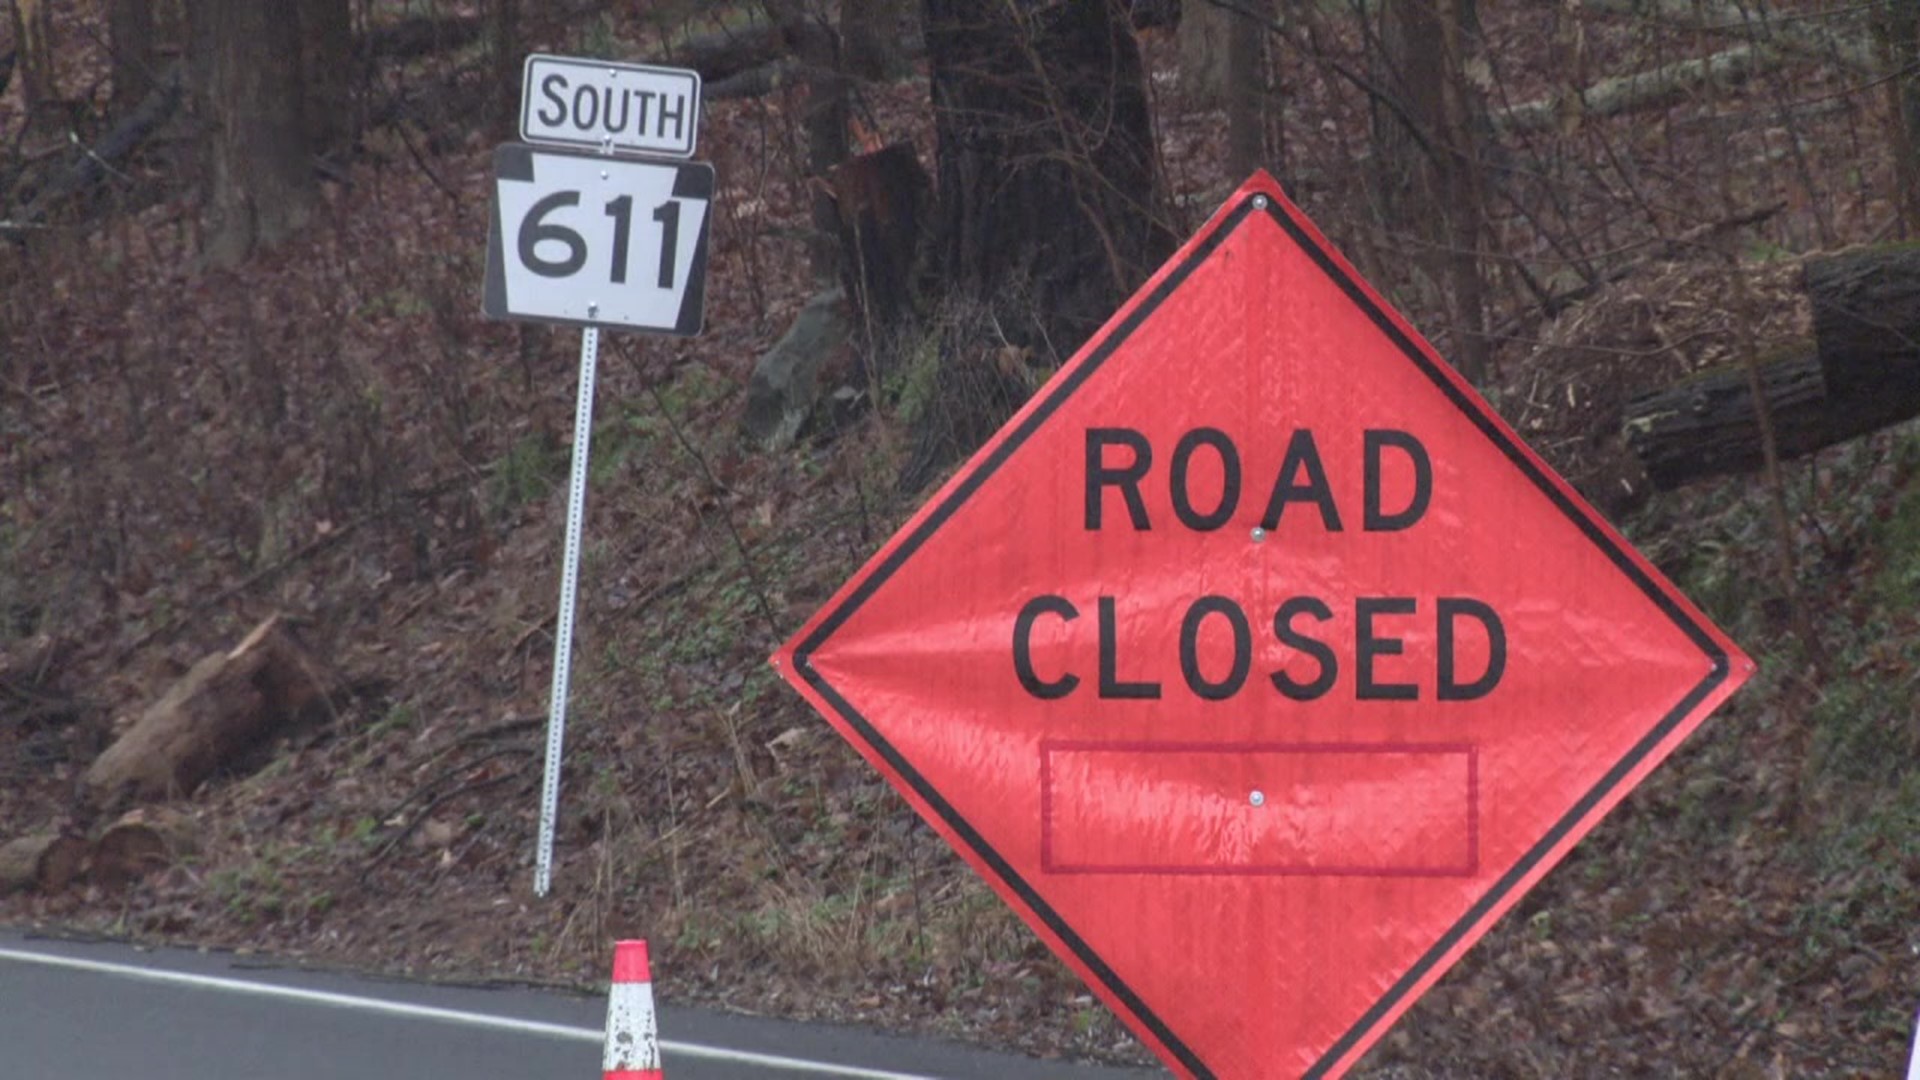 A rock slide closed a part of the road south of the Delaware Water Gap.